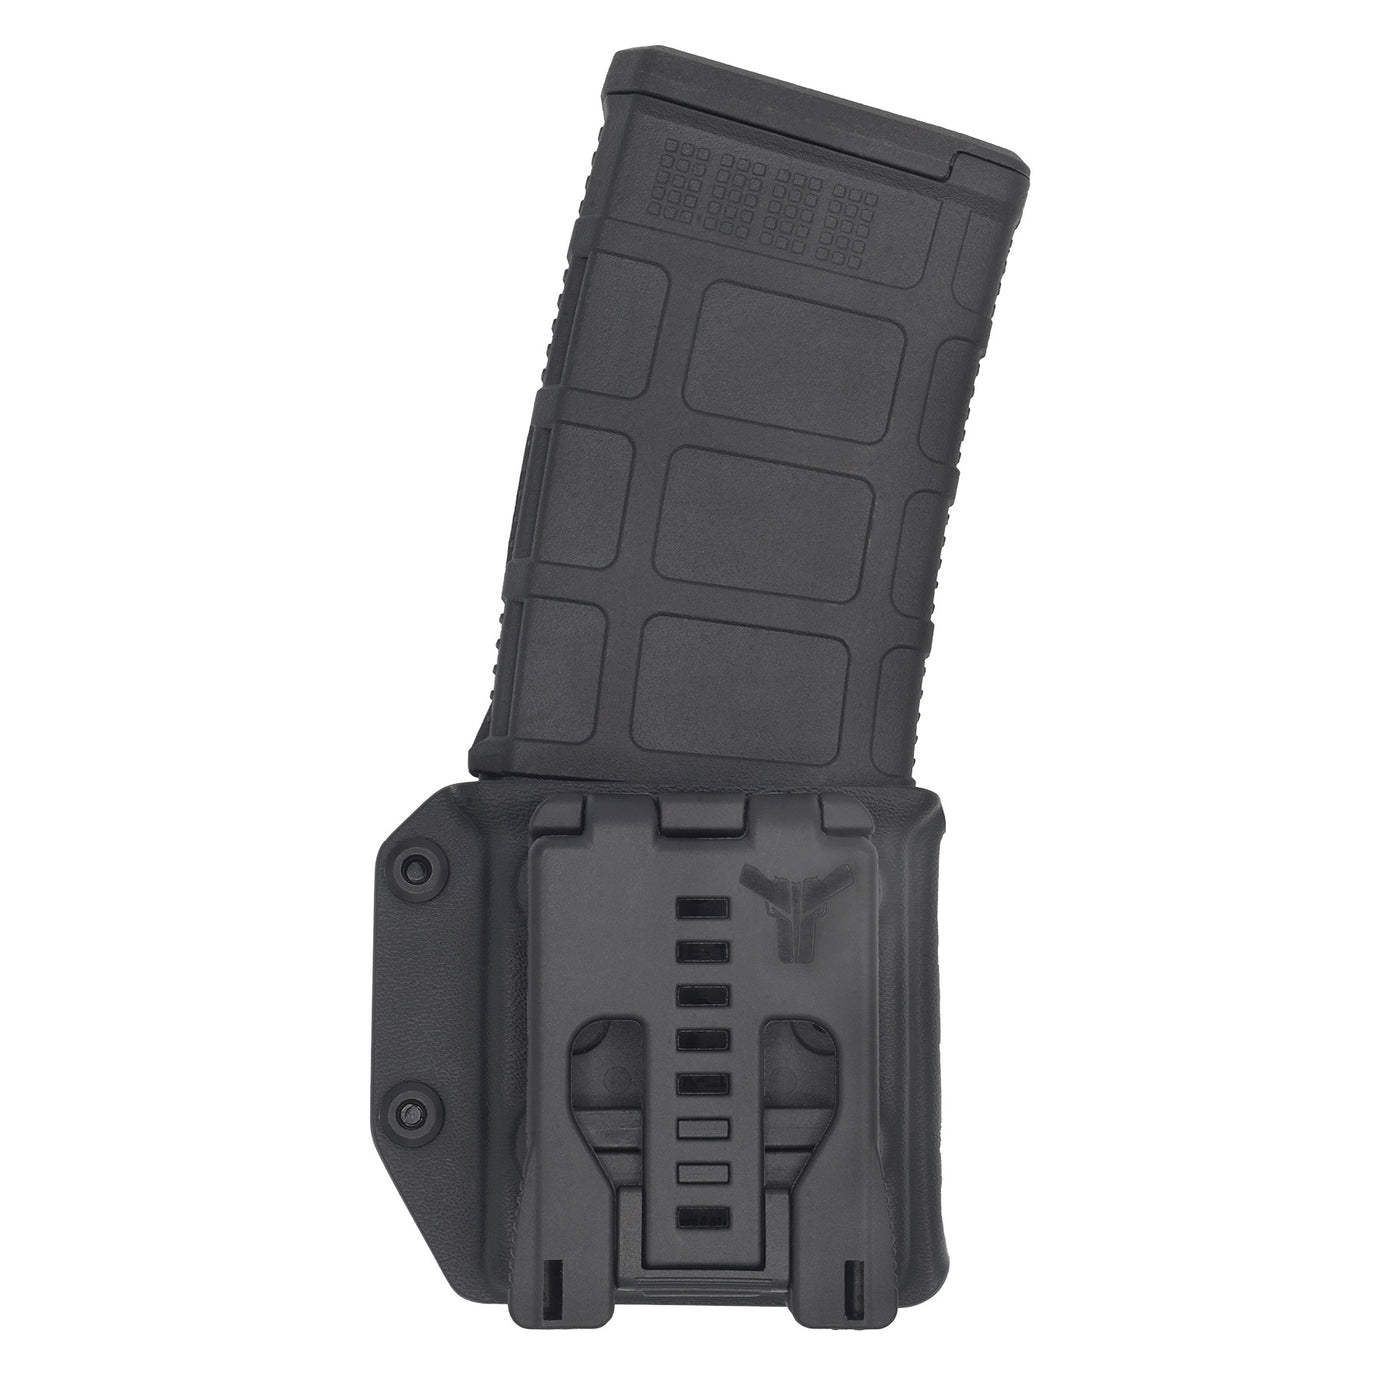 C&G Holsters Competition Kydex Rifle Mag Holster with quick adustable knobs rear view